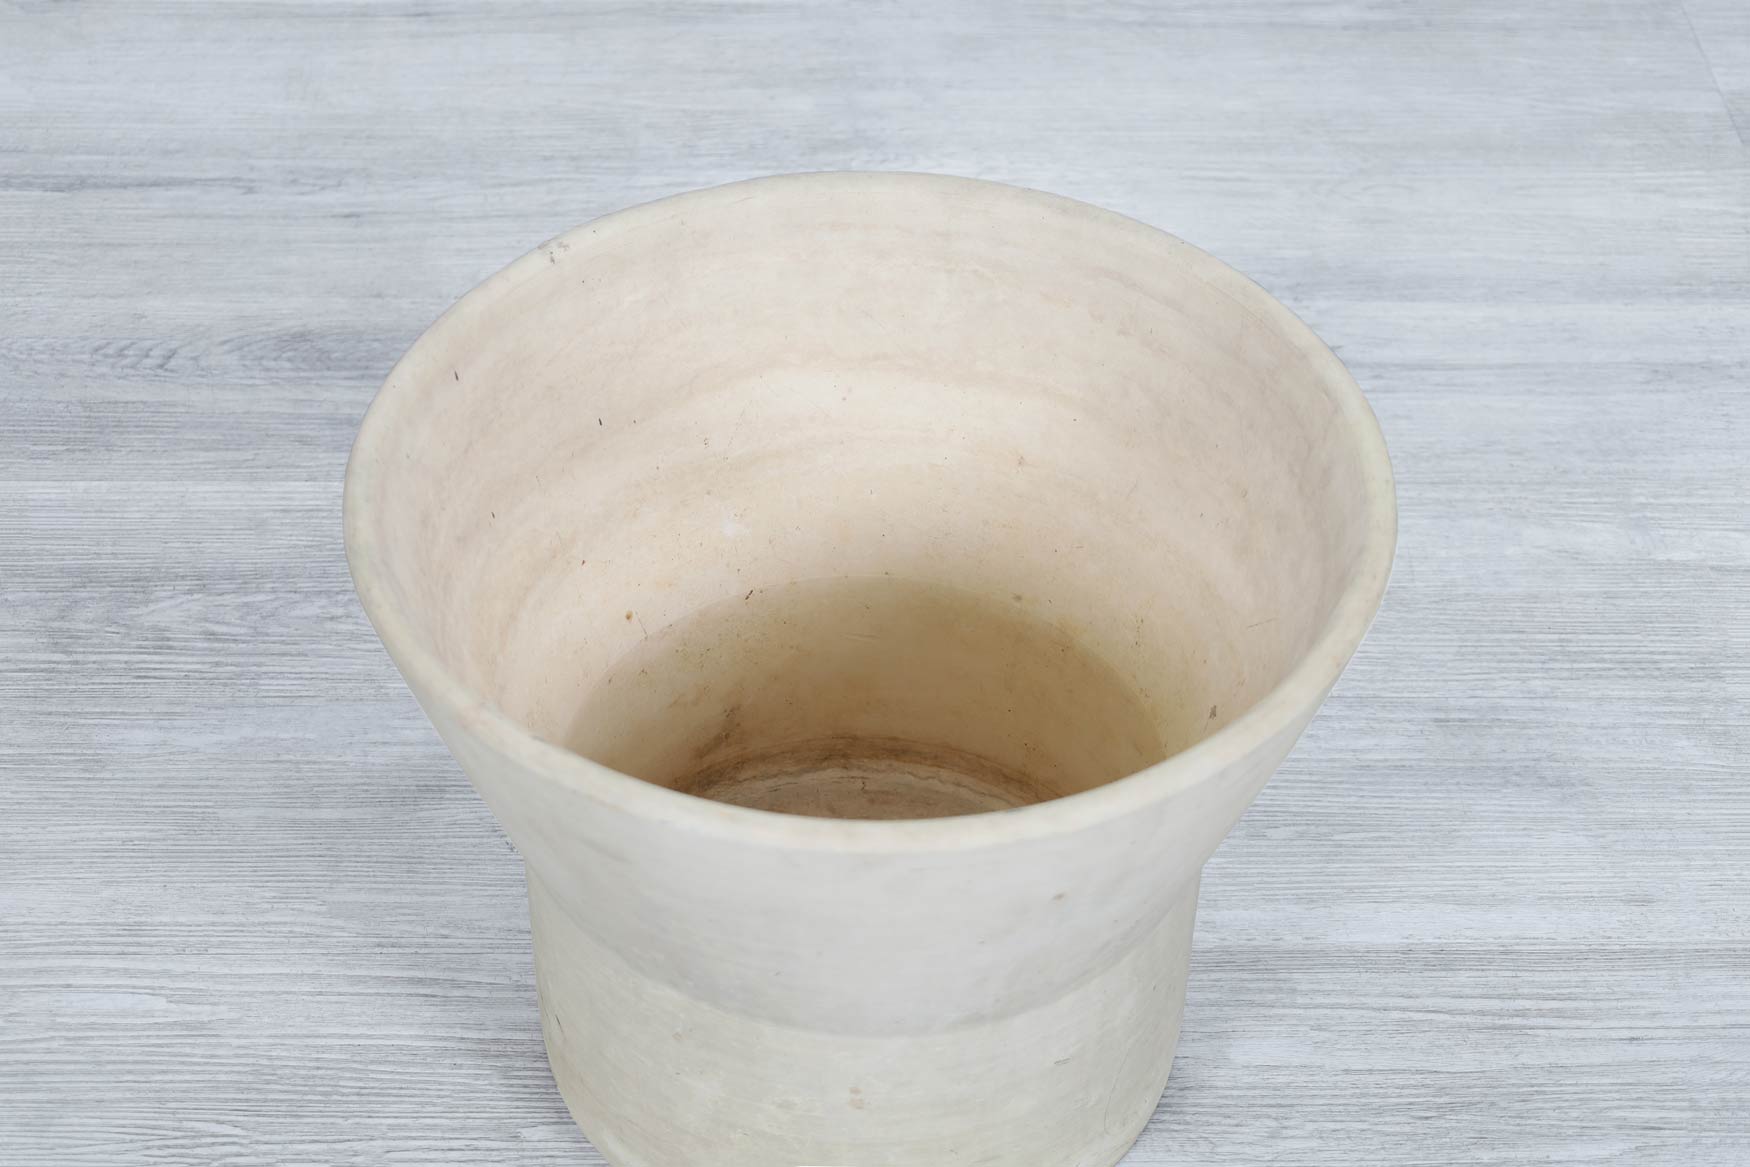 Architectural Pottery M-2 Planter by Paul McCobb